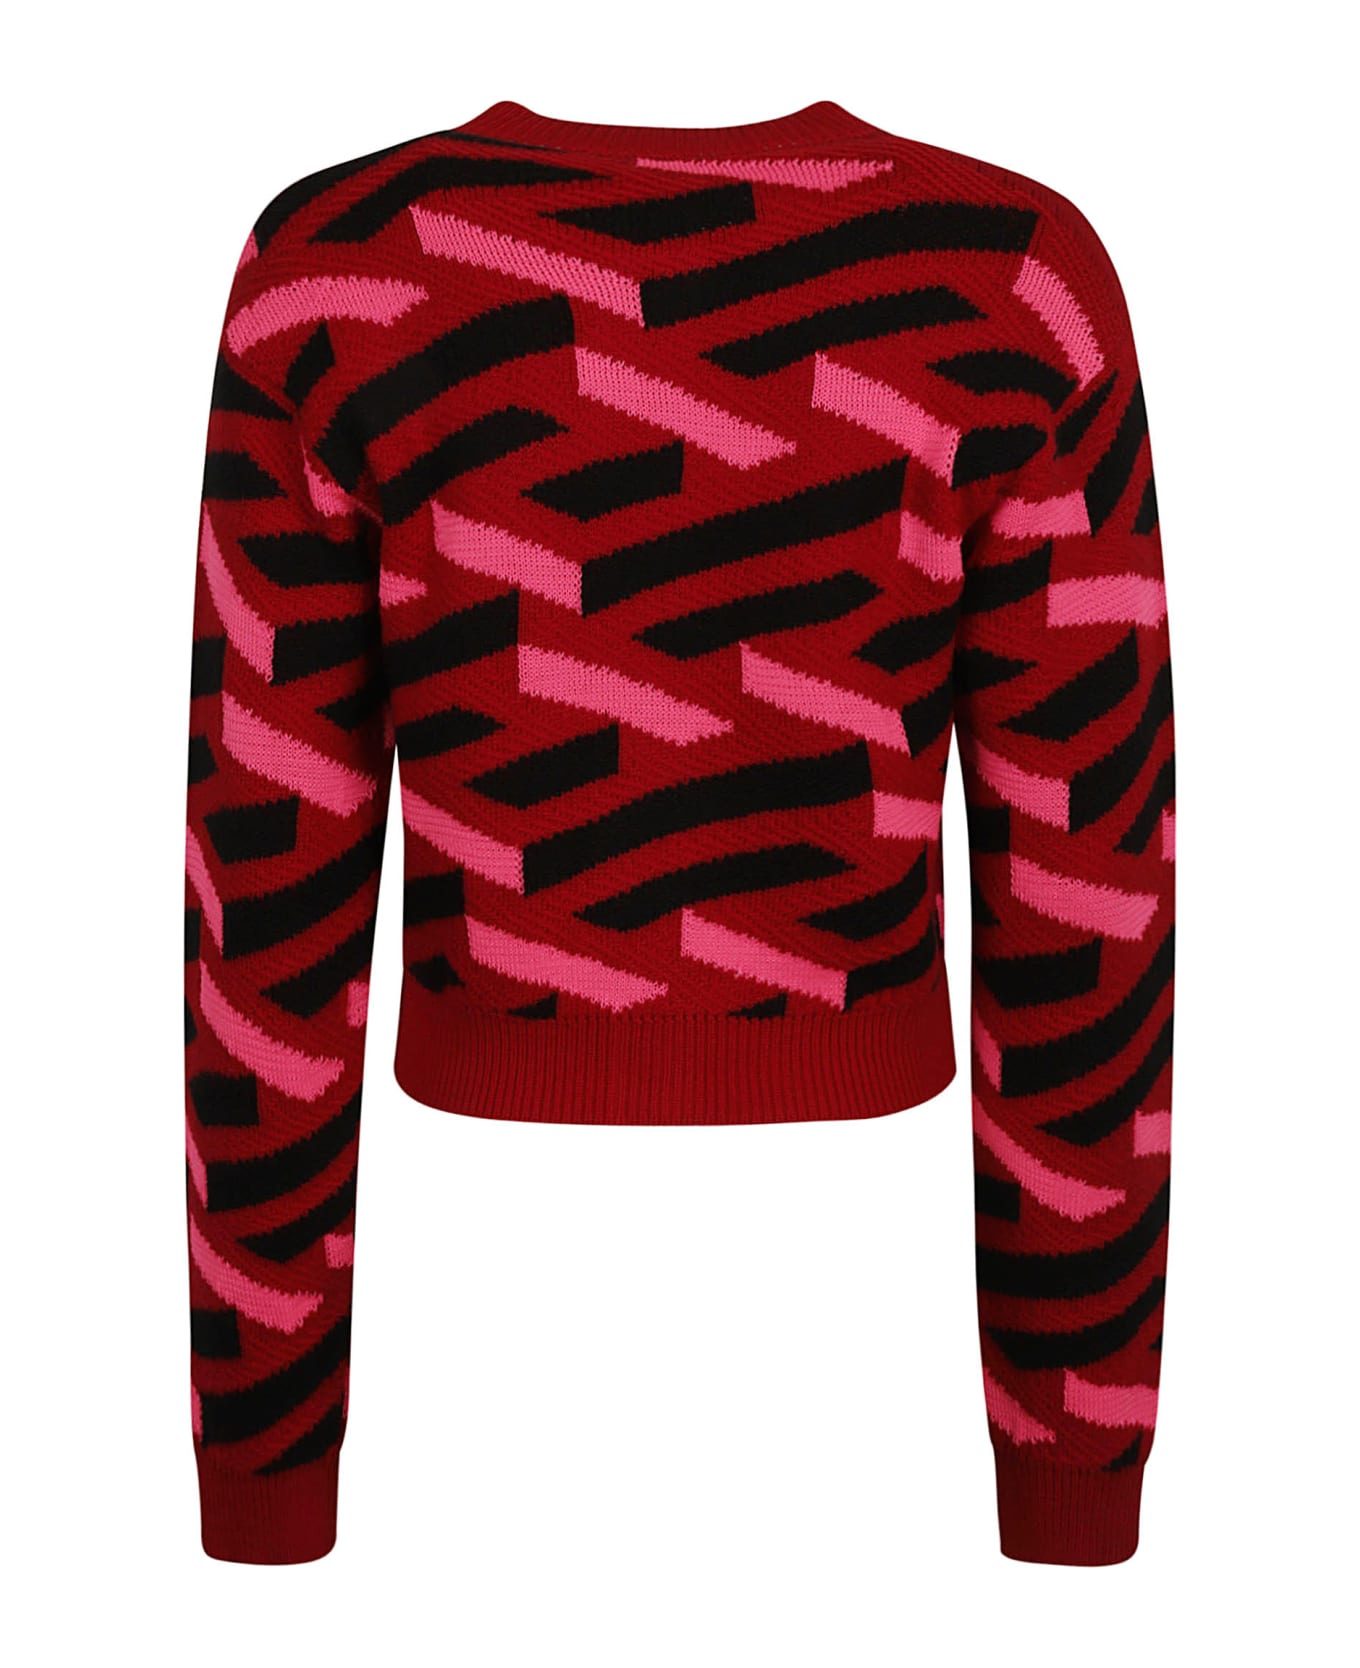 Versace Greca Texture Knit Sweater - Red/Fuxia